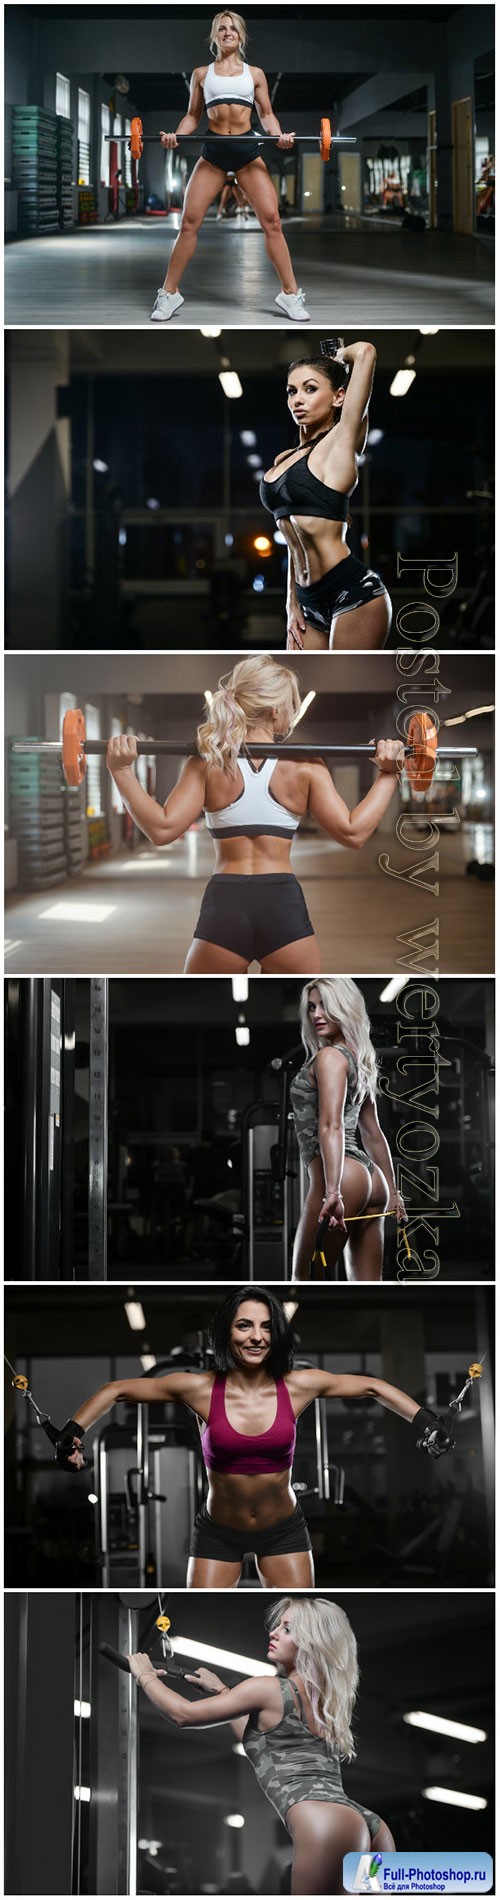 Girls in the gym, beauty and health